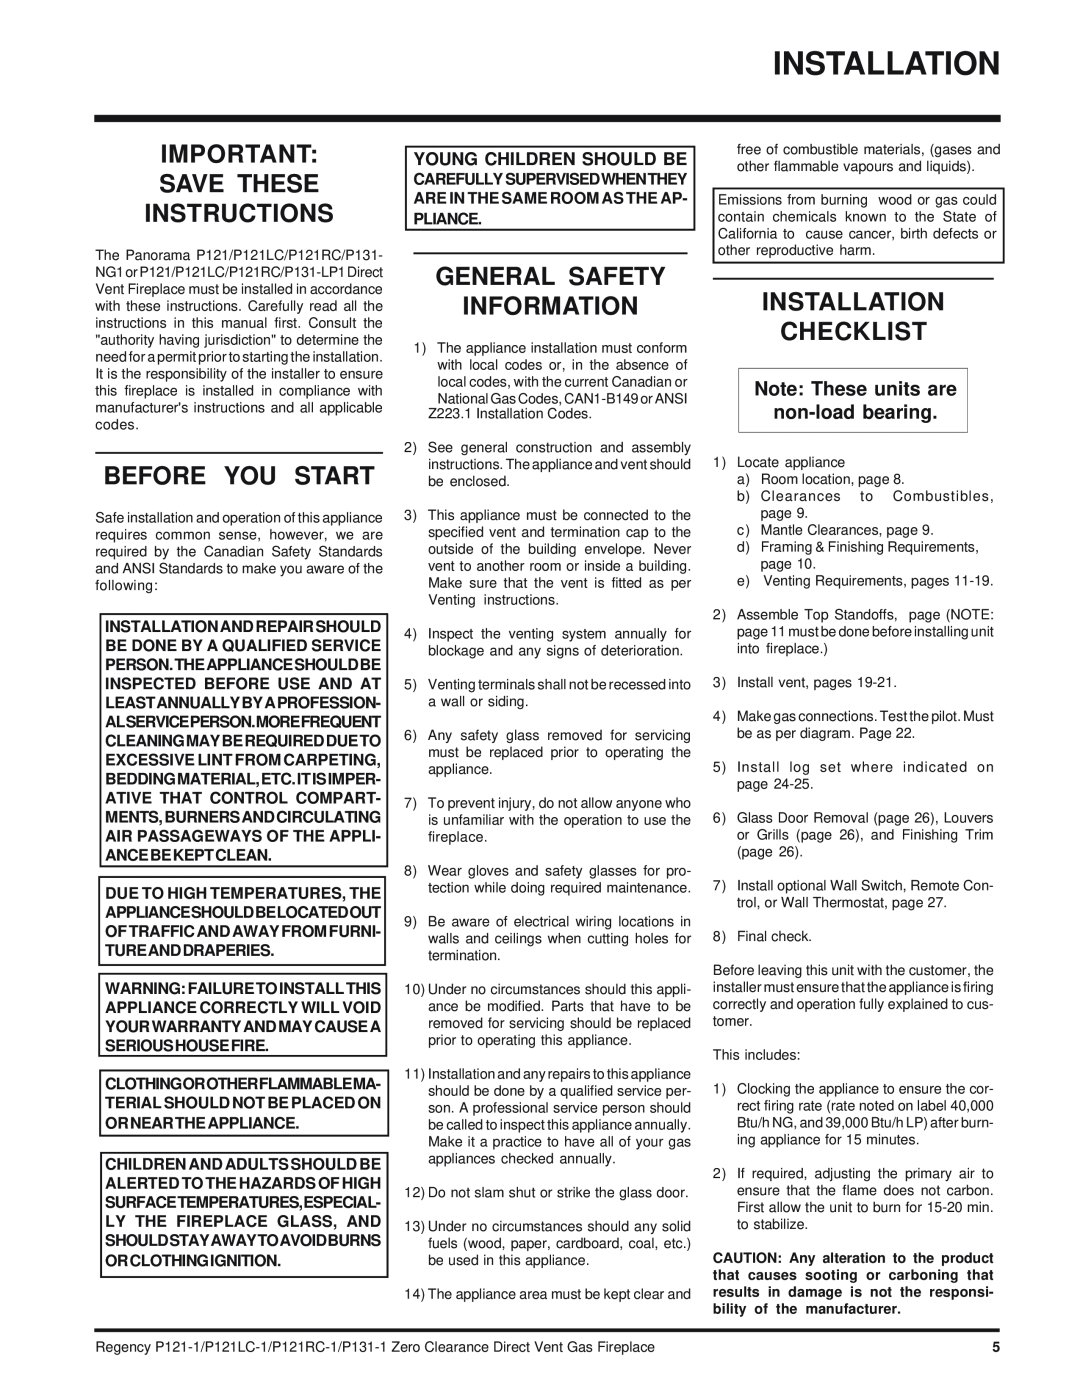 Regency P121RC, P121LC Save These Instructions, Before You Start, General Safety Information, Installation Checklist 